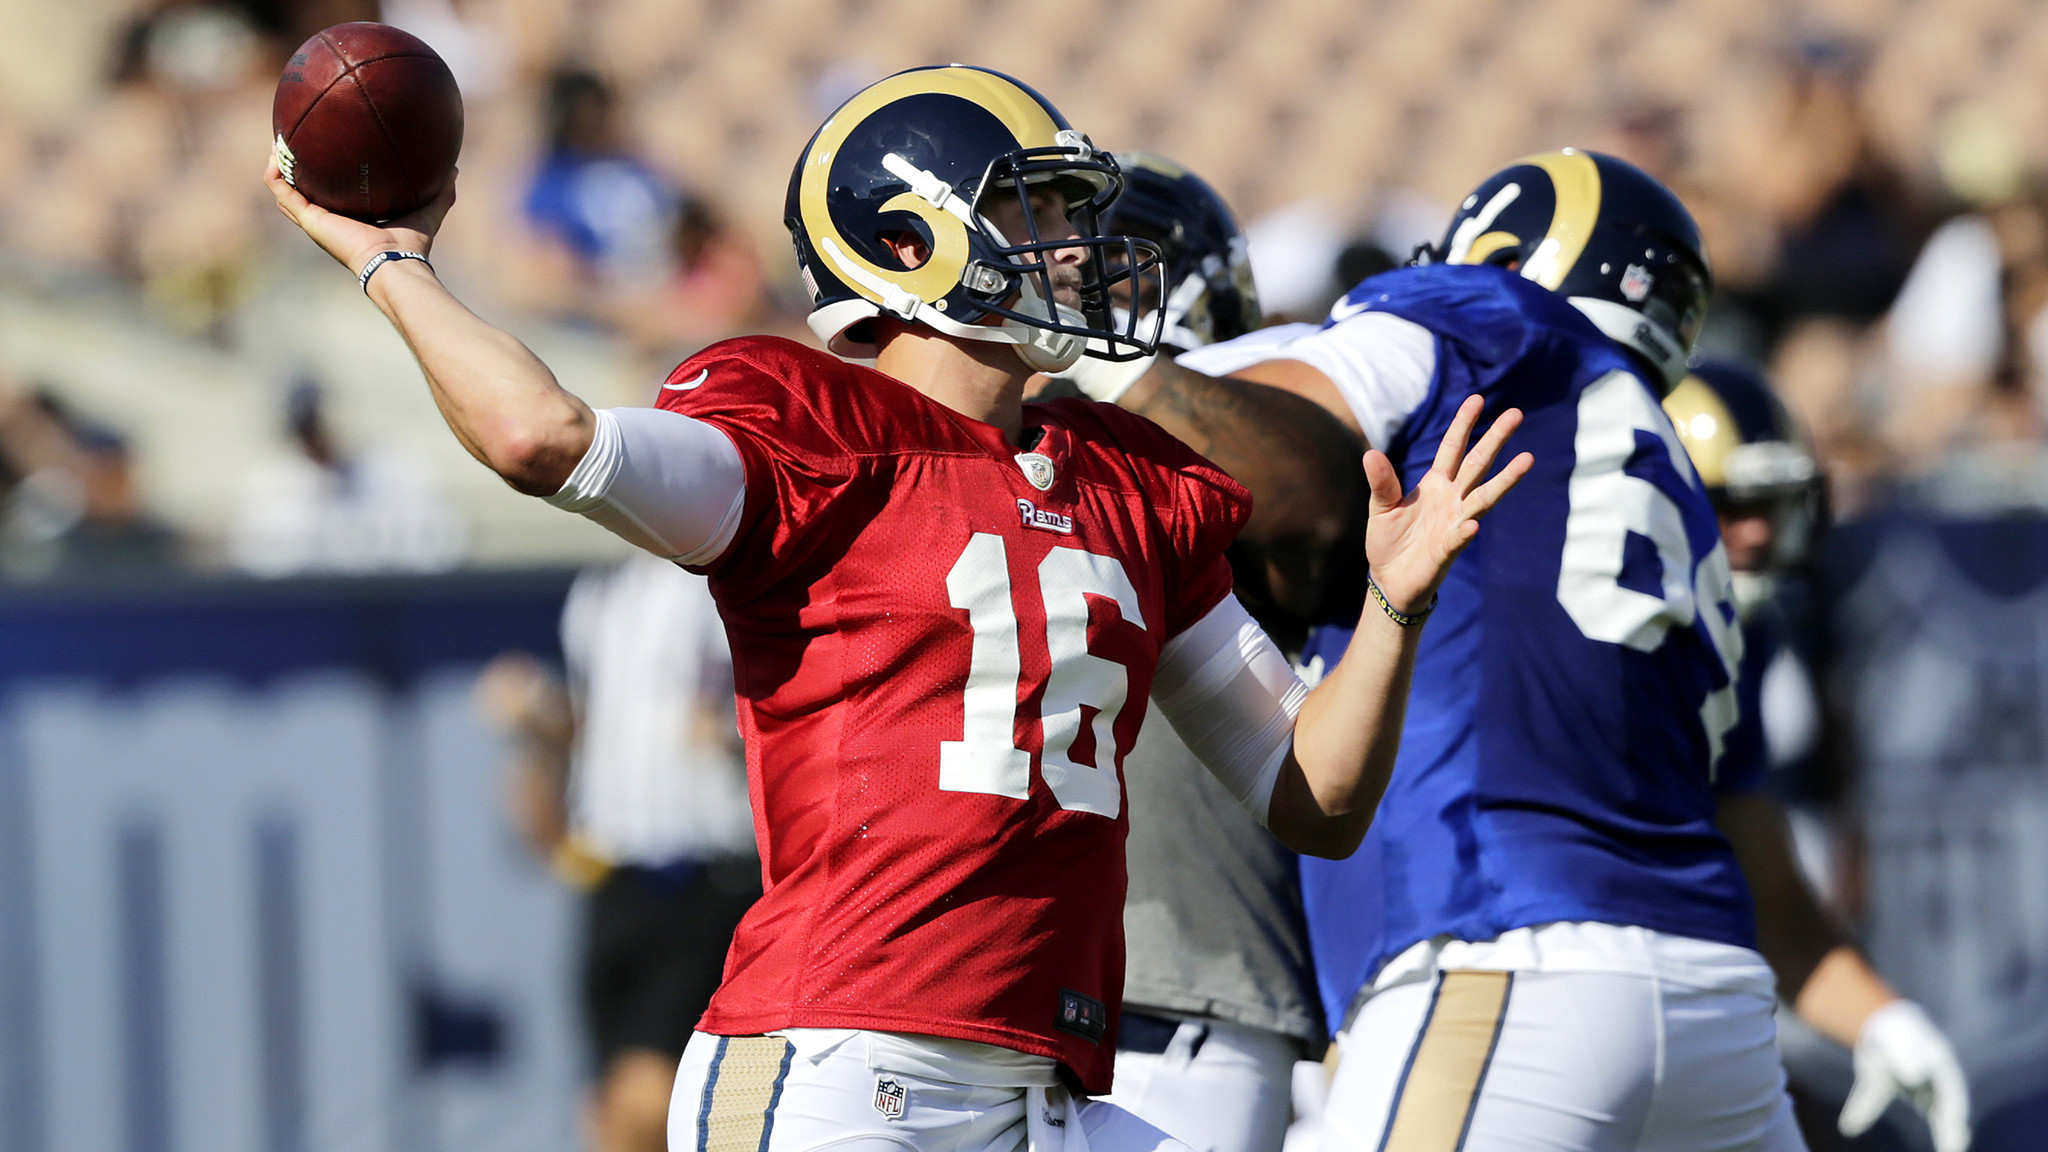 Jared Goff continues to make progress during Rams scrimmage at the Coliseum – LA Times